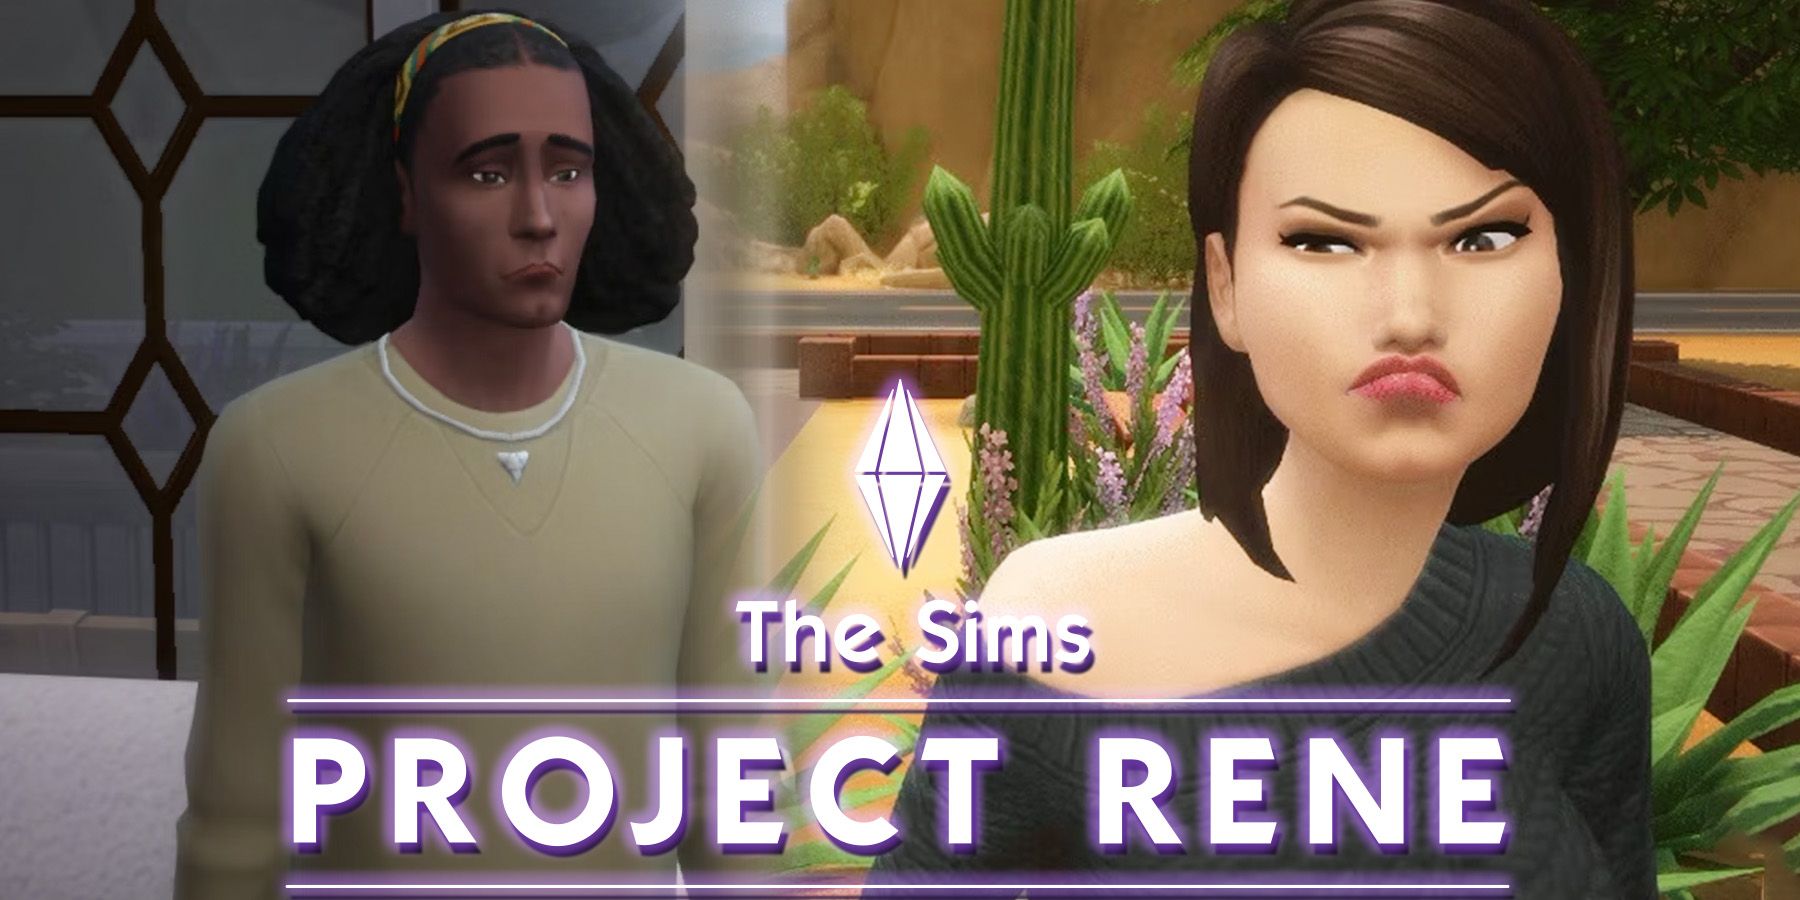 The Sims 5 Project Rene logo with sad and grumpy-looking sims